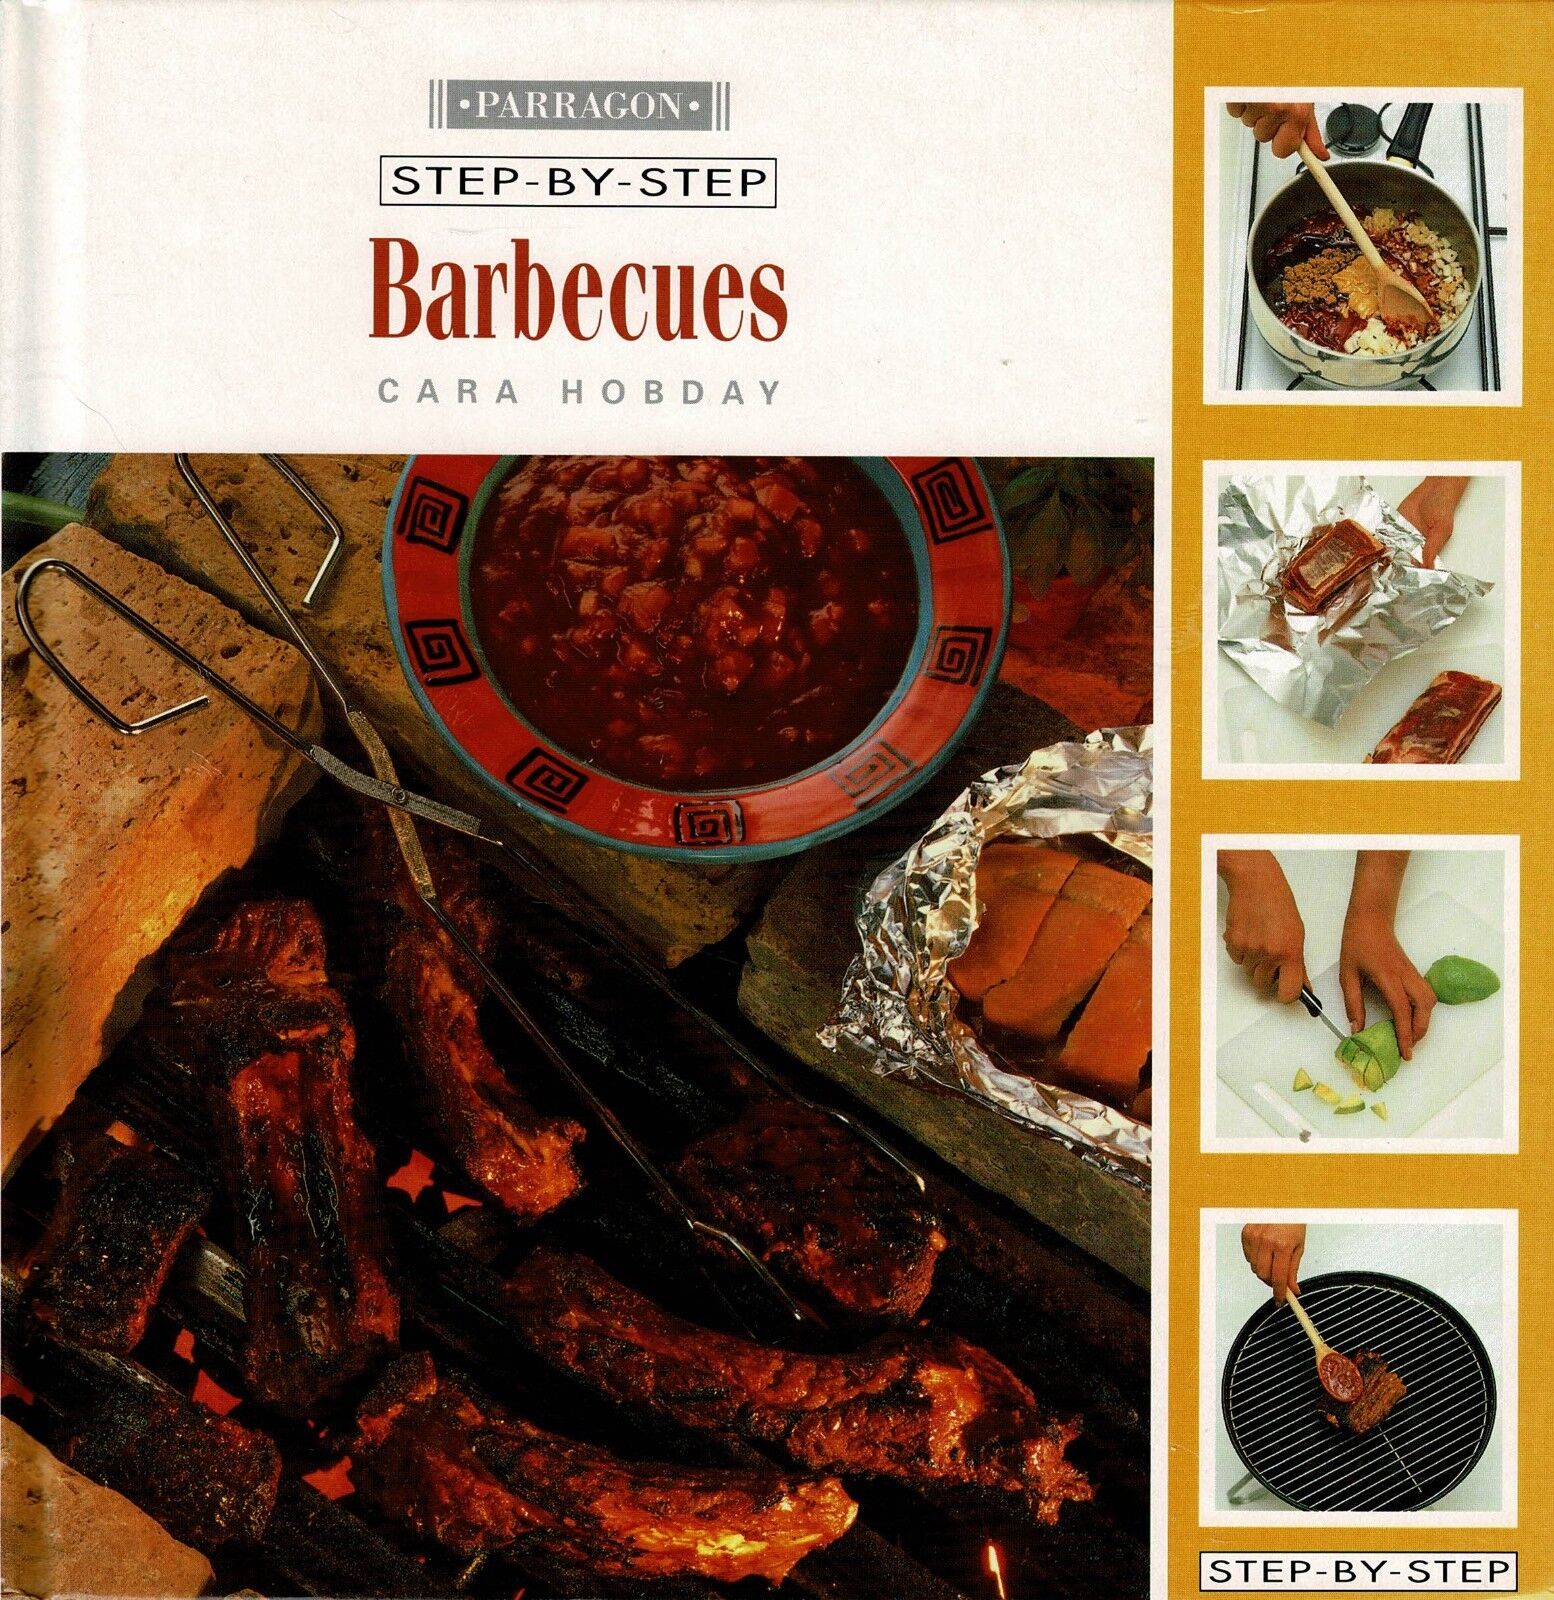 Step by Step Barbecue by Cara Hobday RRP £3.99 CLEARANCE XL £1.99